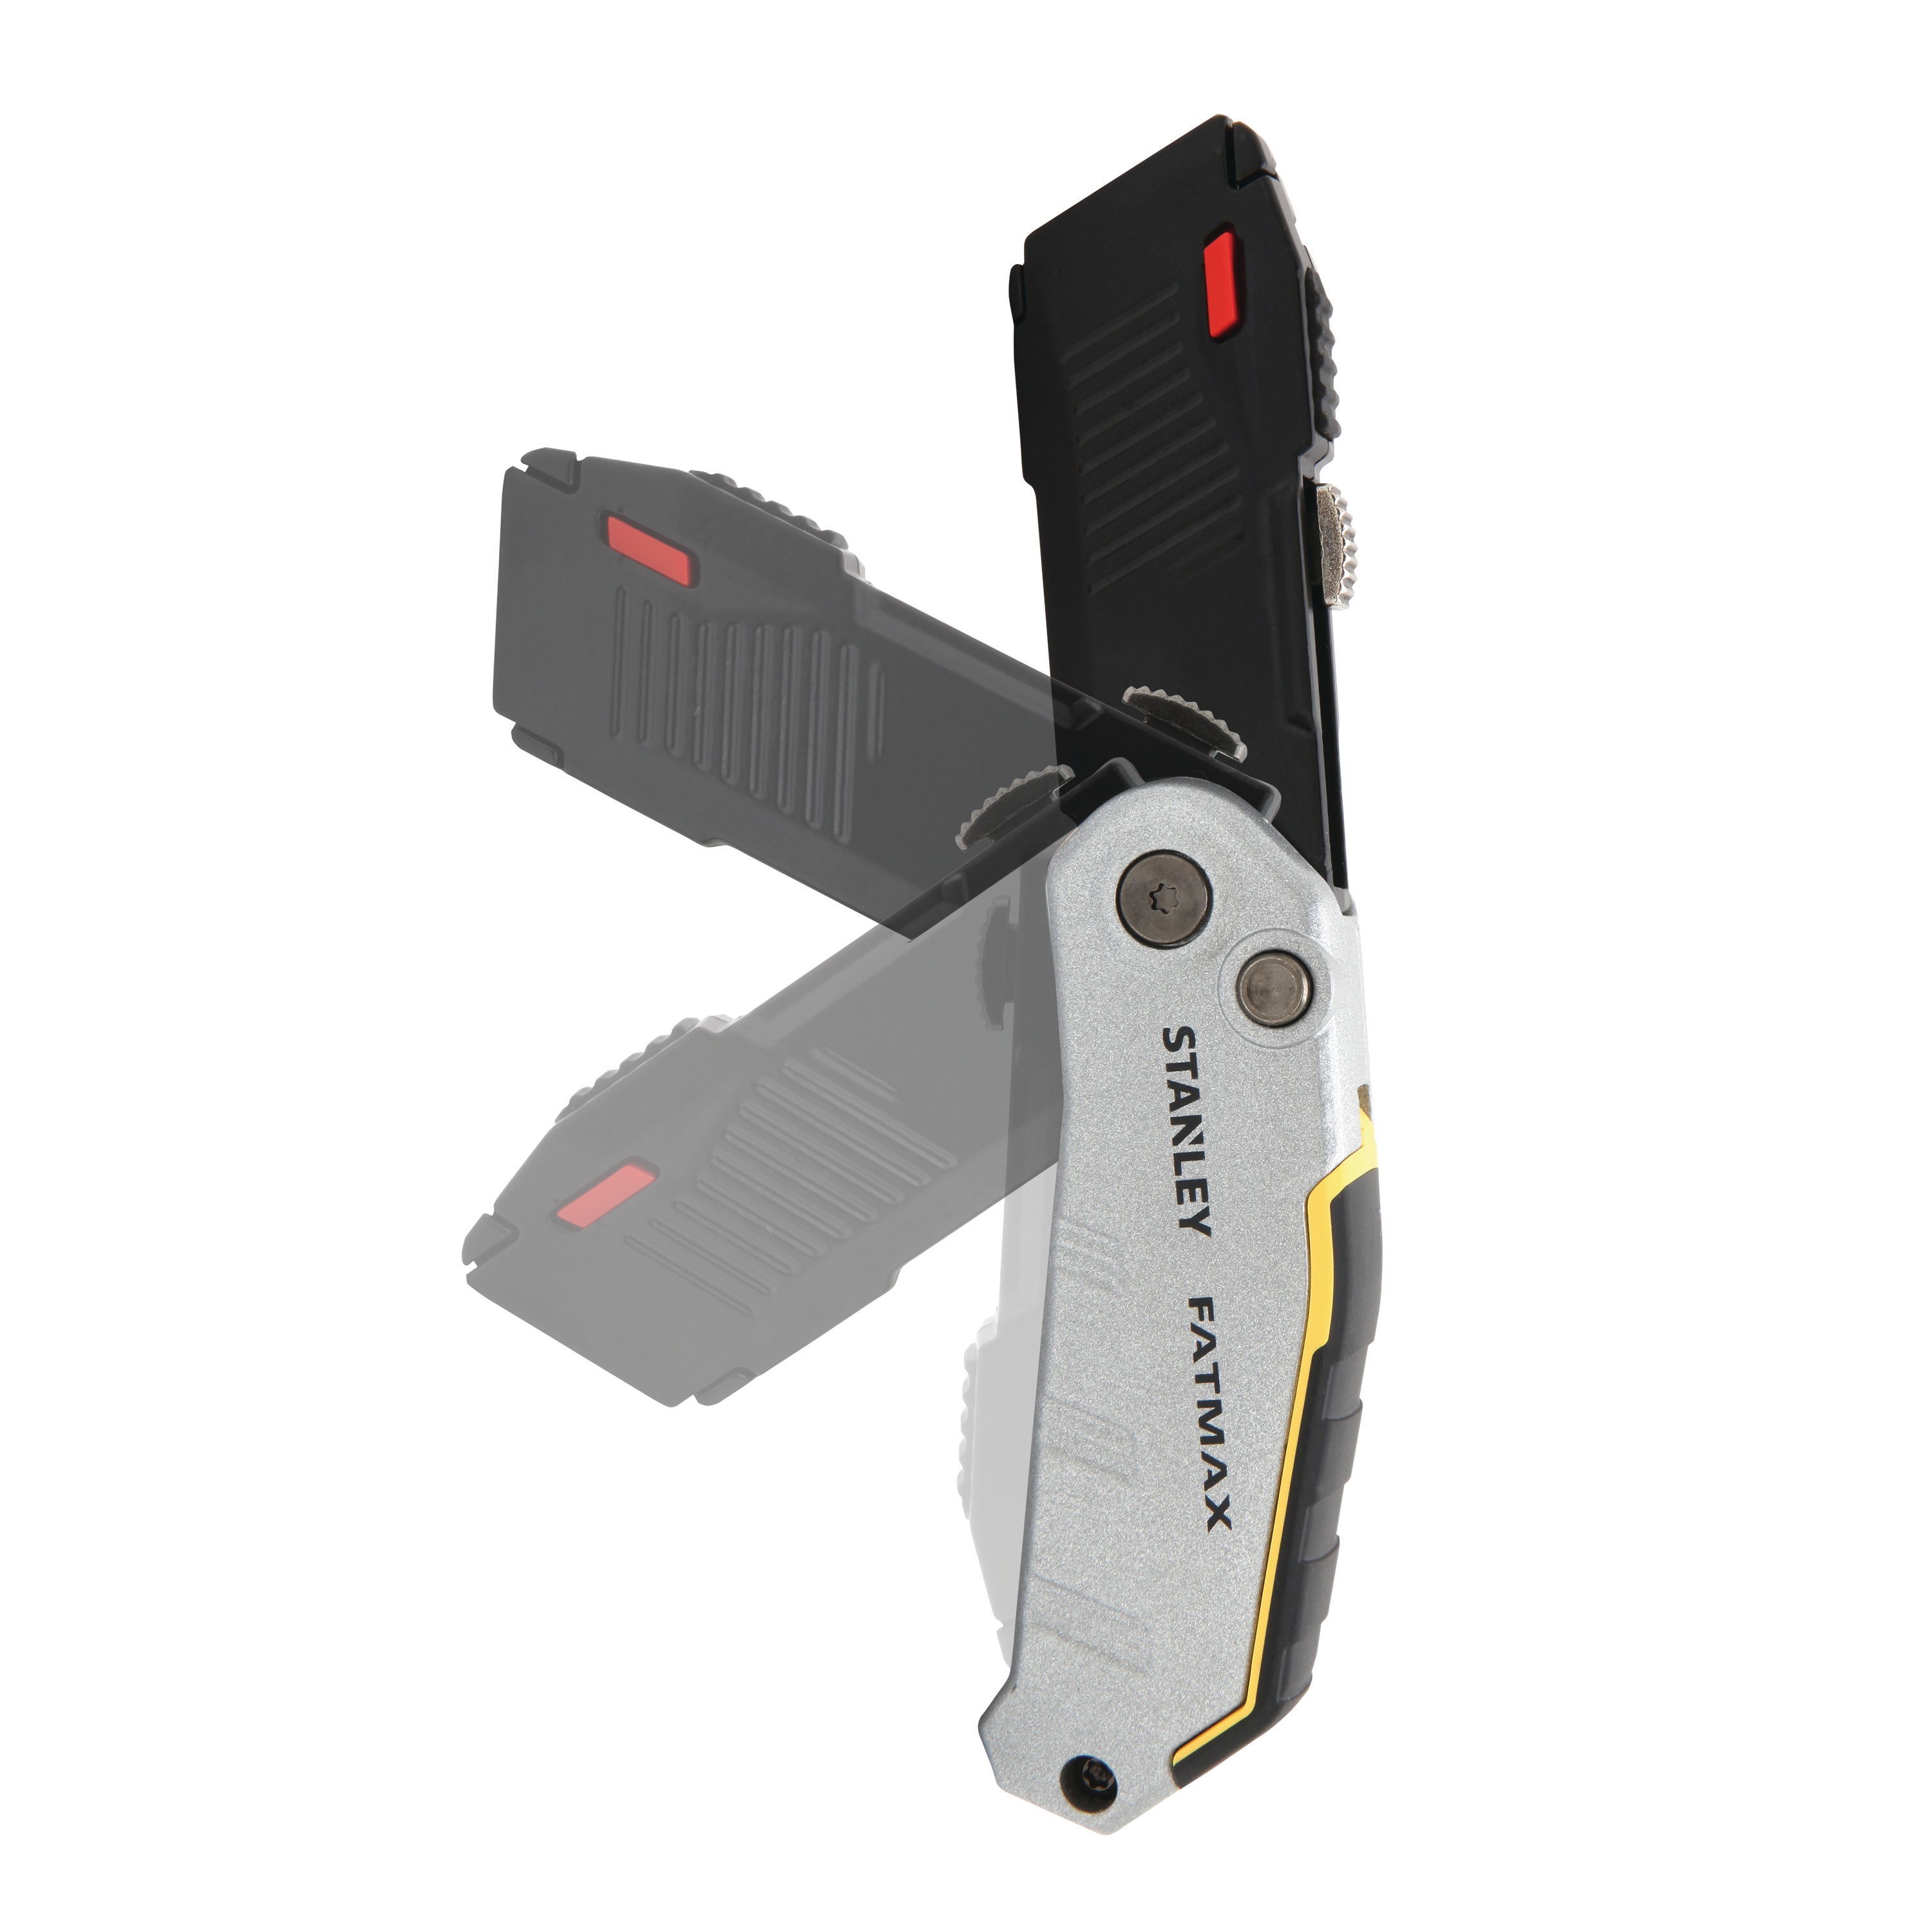 Stanley Tools - FATMAX Spring Assist Folding Retractable Utility Knife - FMHT10315